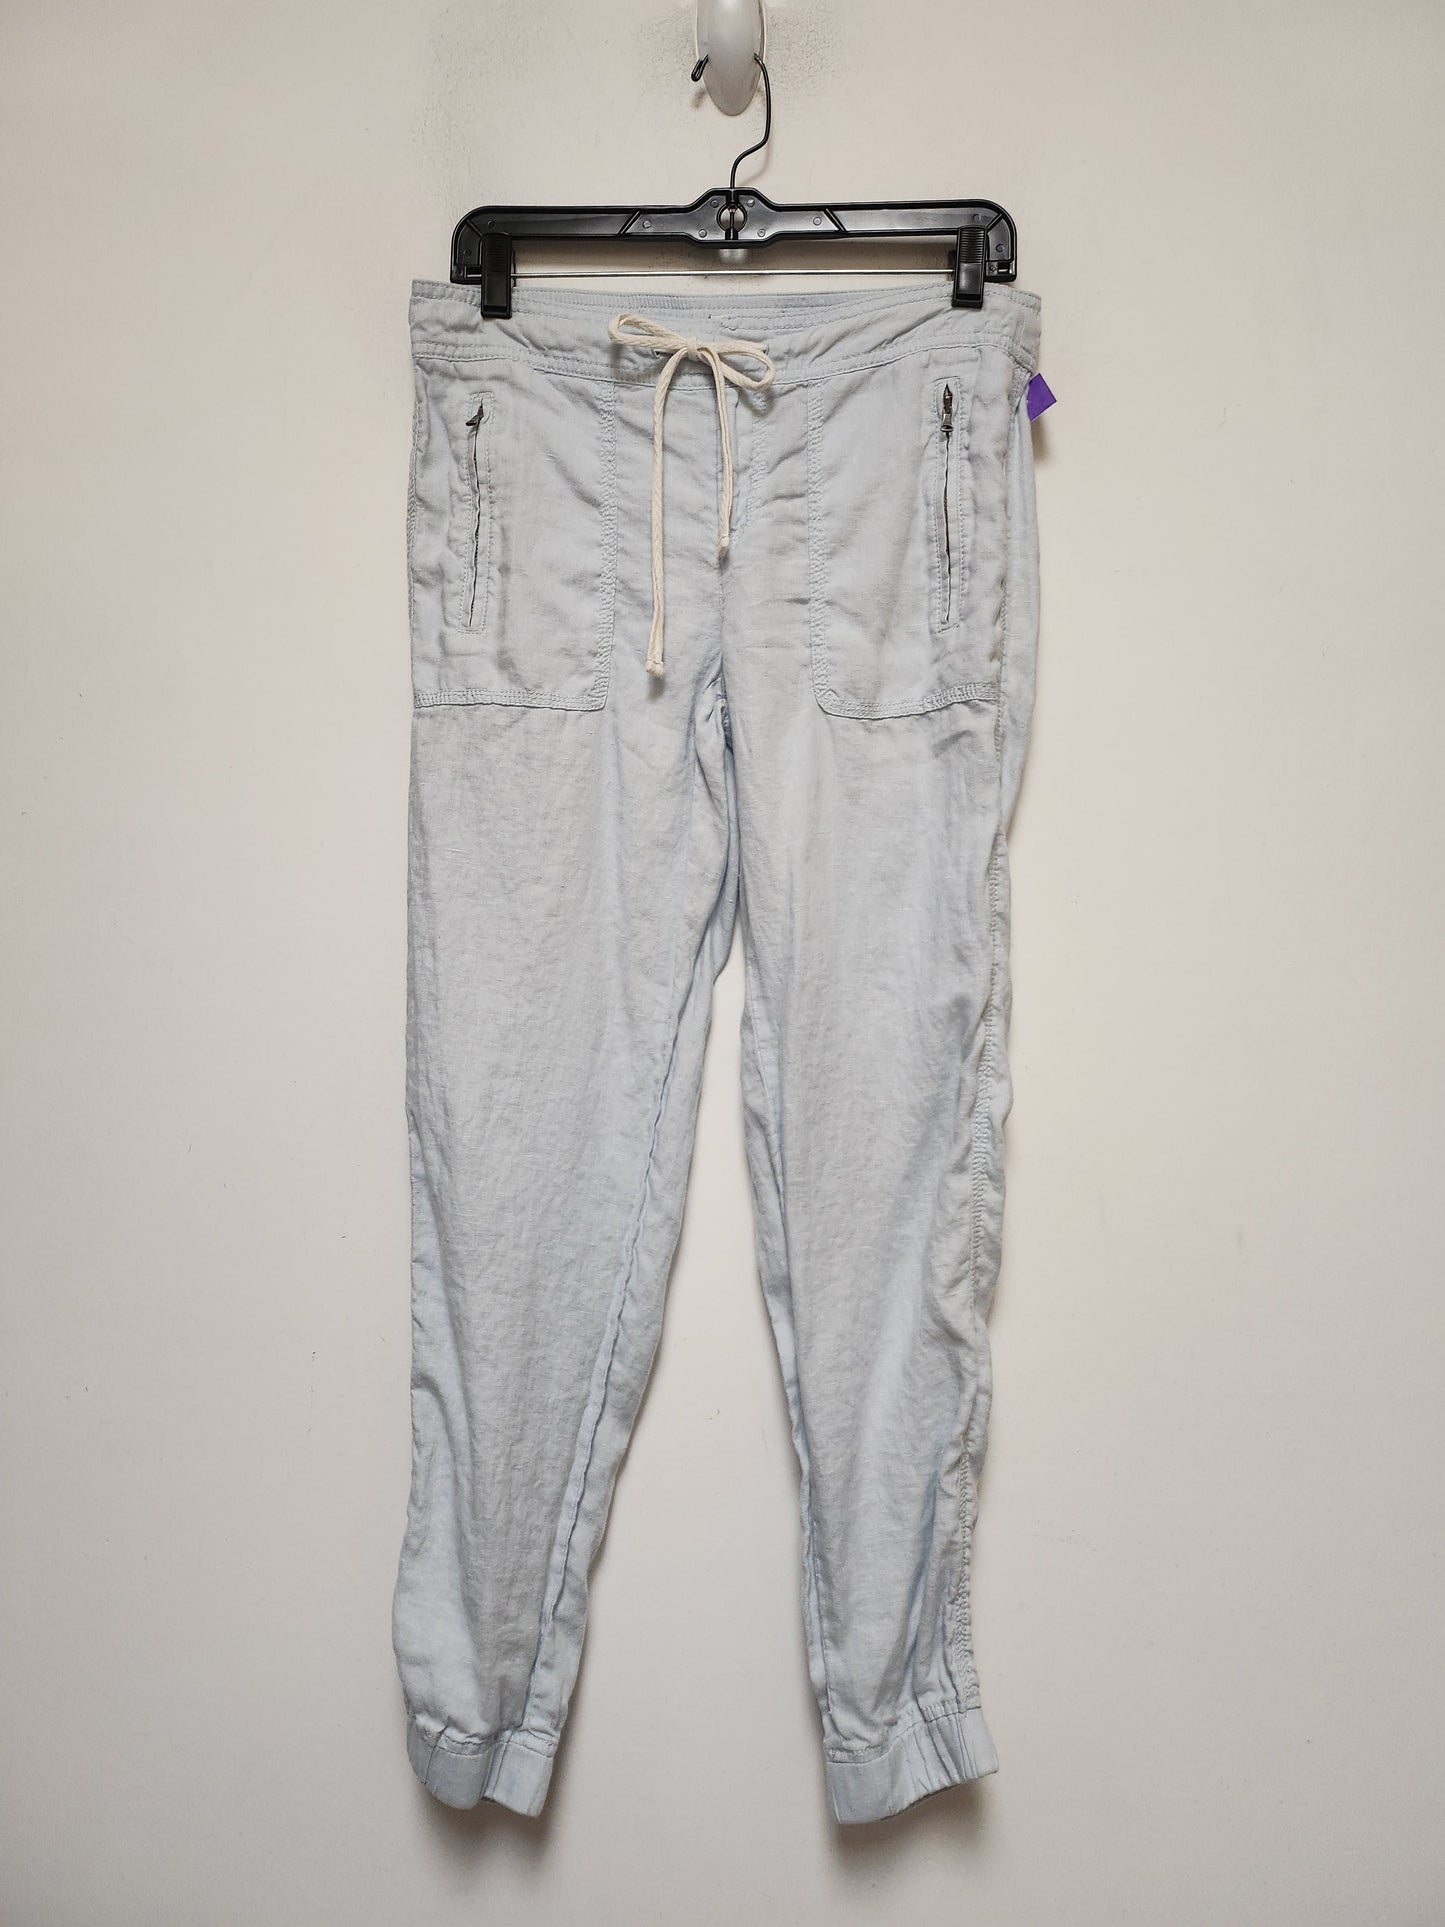 Blue Pants Joggers Lou And Grey, Size 0